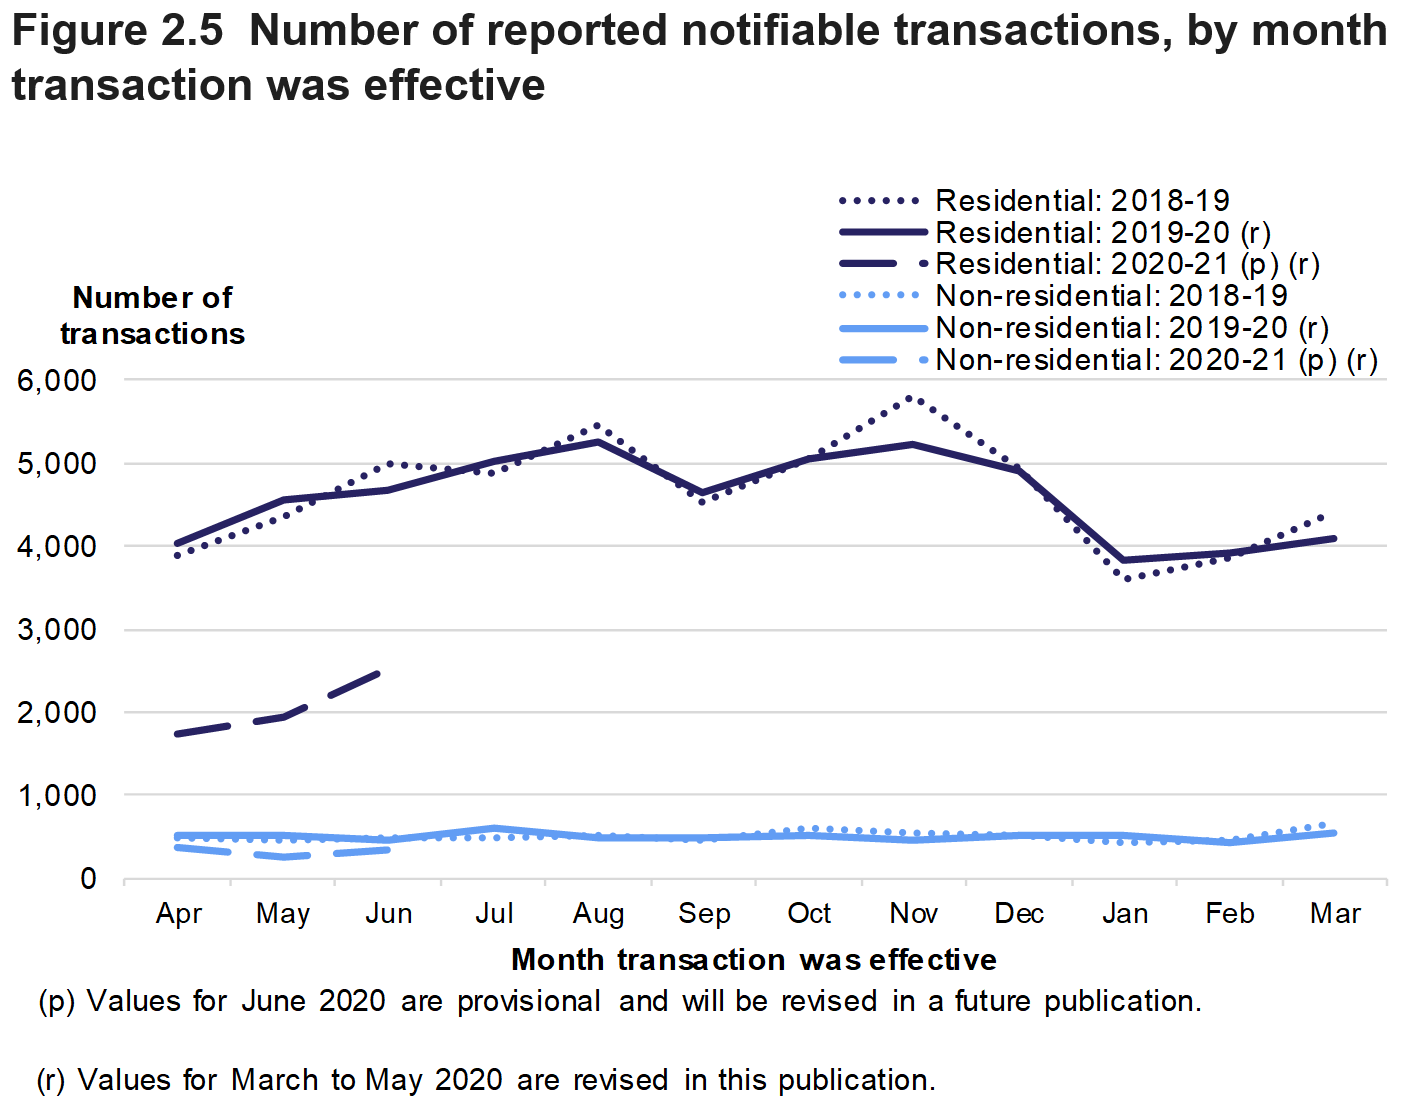 Figure 2.5 shows the monthly numbers of reported notifiable transactions from April 2018 to June 2020, for residential and non-residential transactions.